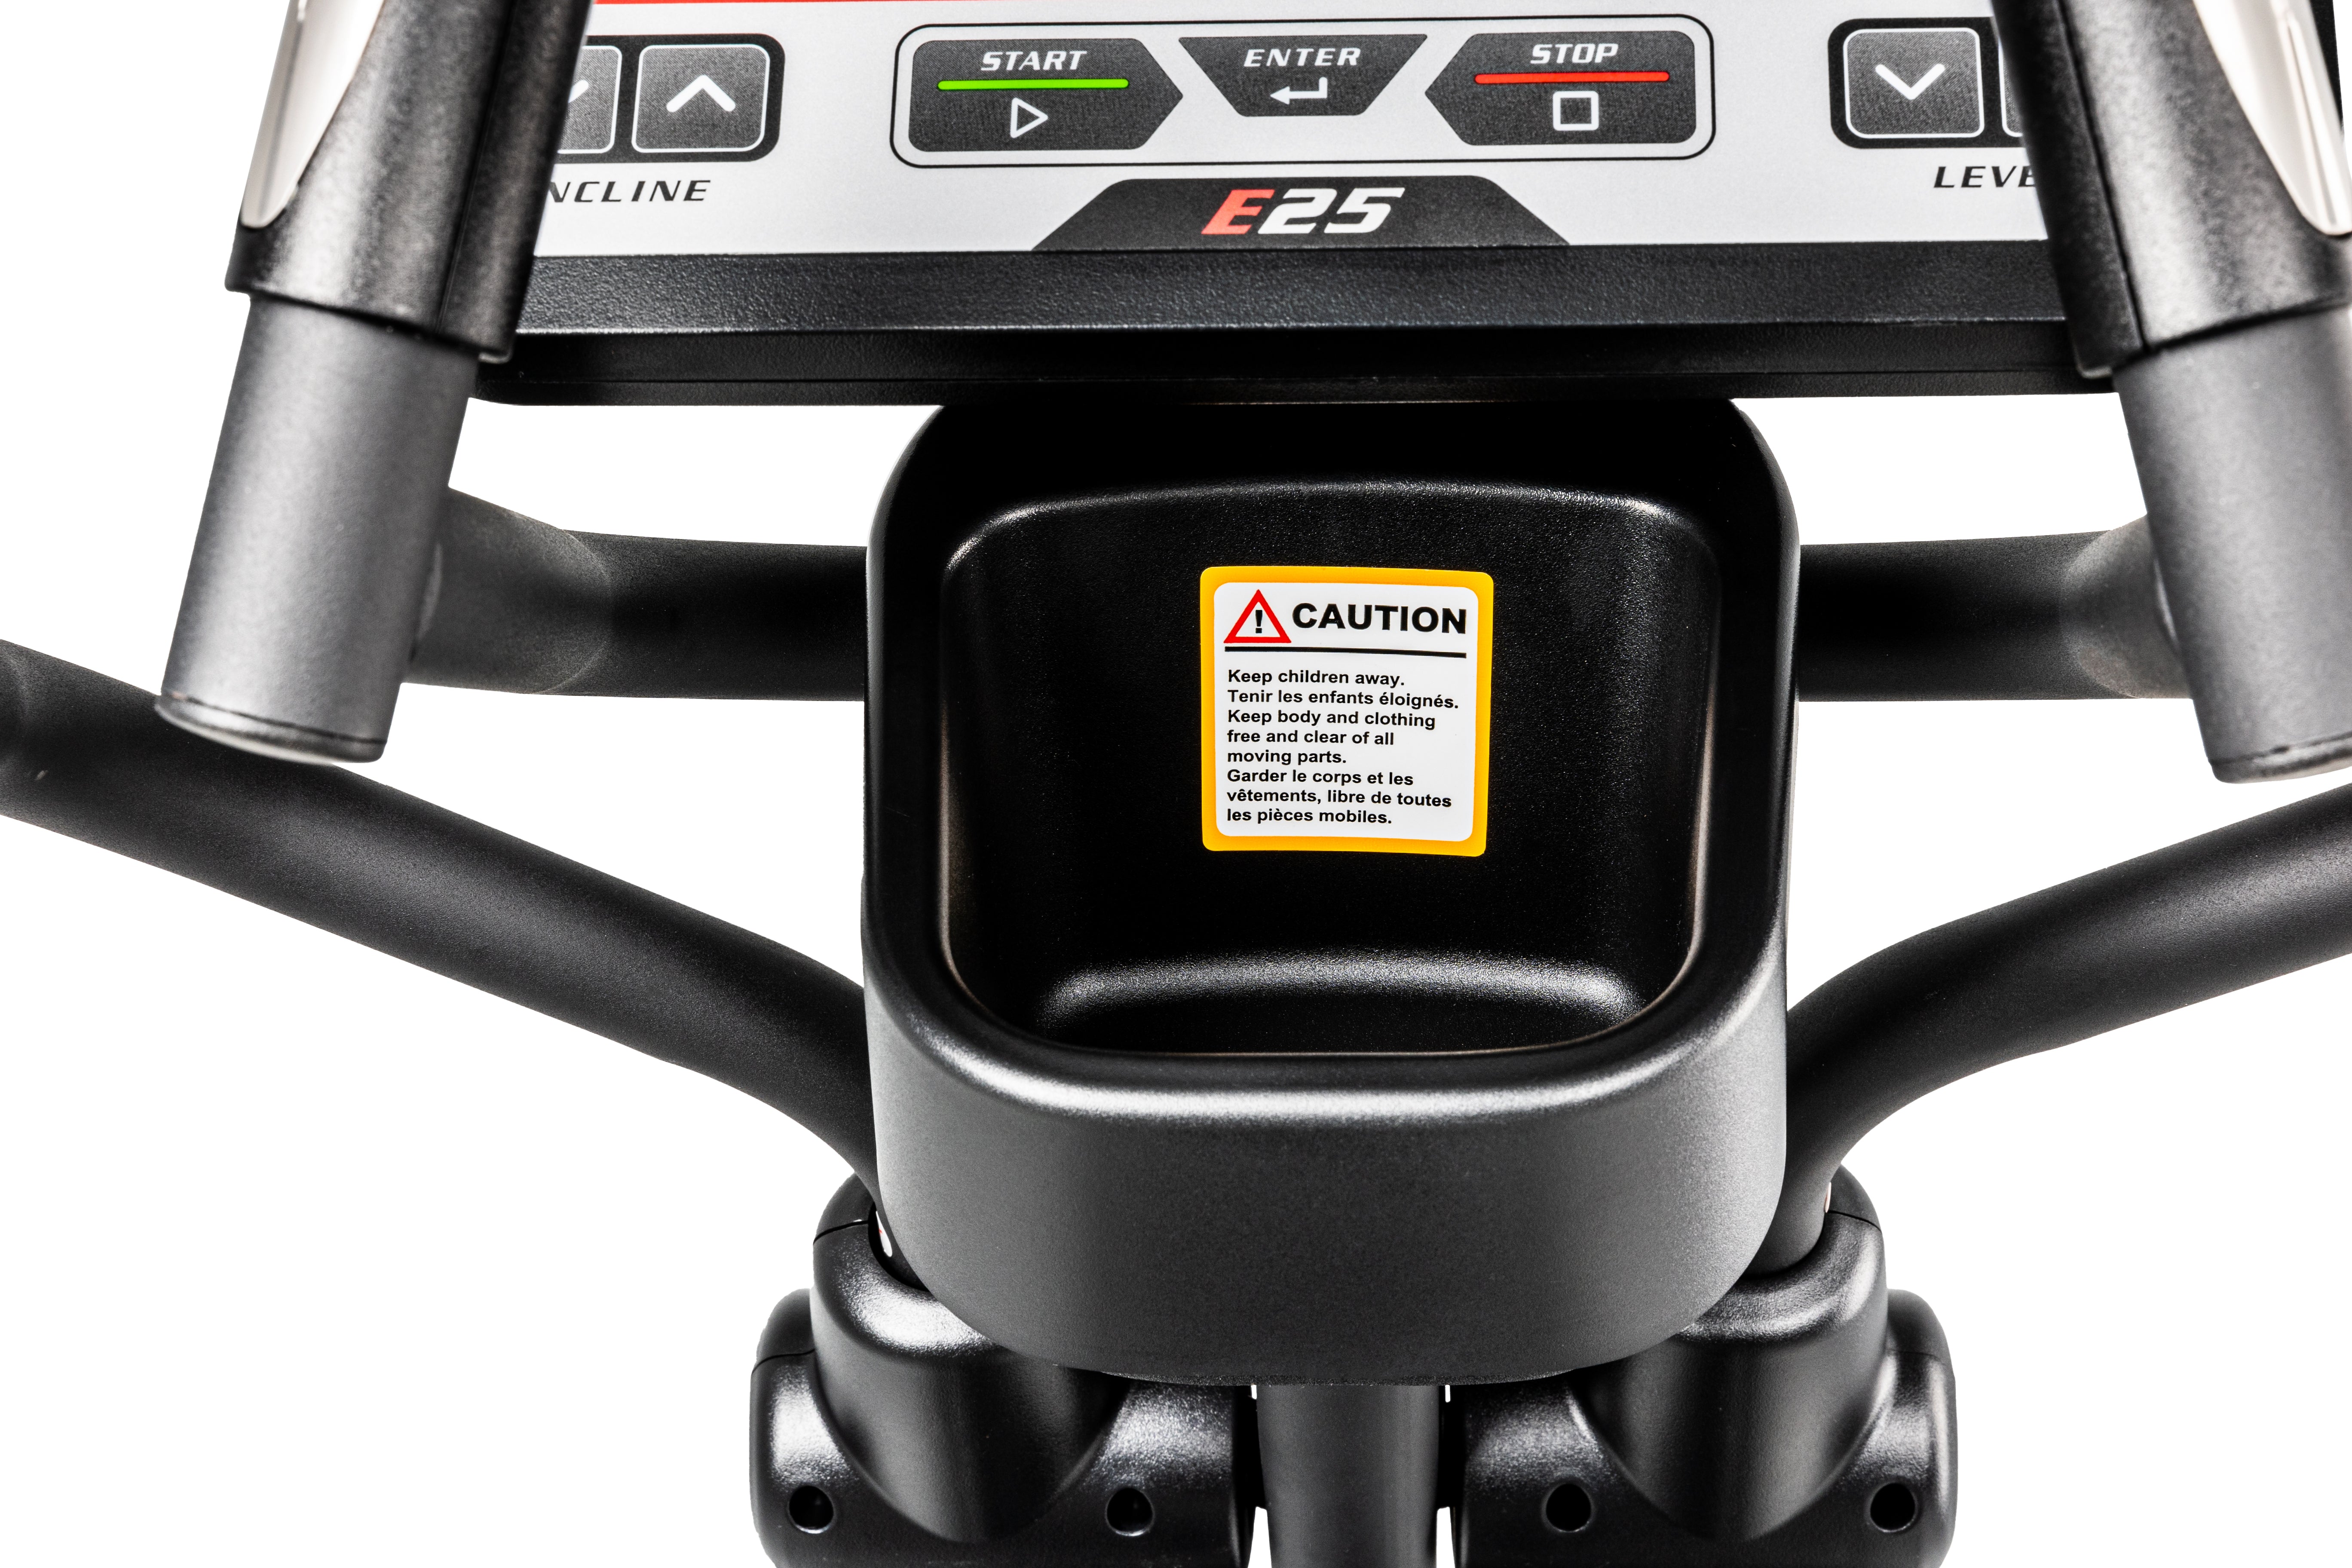 Top view of the Sole E25 elliptical trainer control panel featuring buttons for incline, start, enter, stop, and level adjustments, along with a caution sticker warning to keep children away and avoid moving parts.